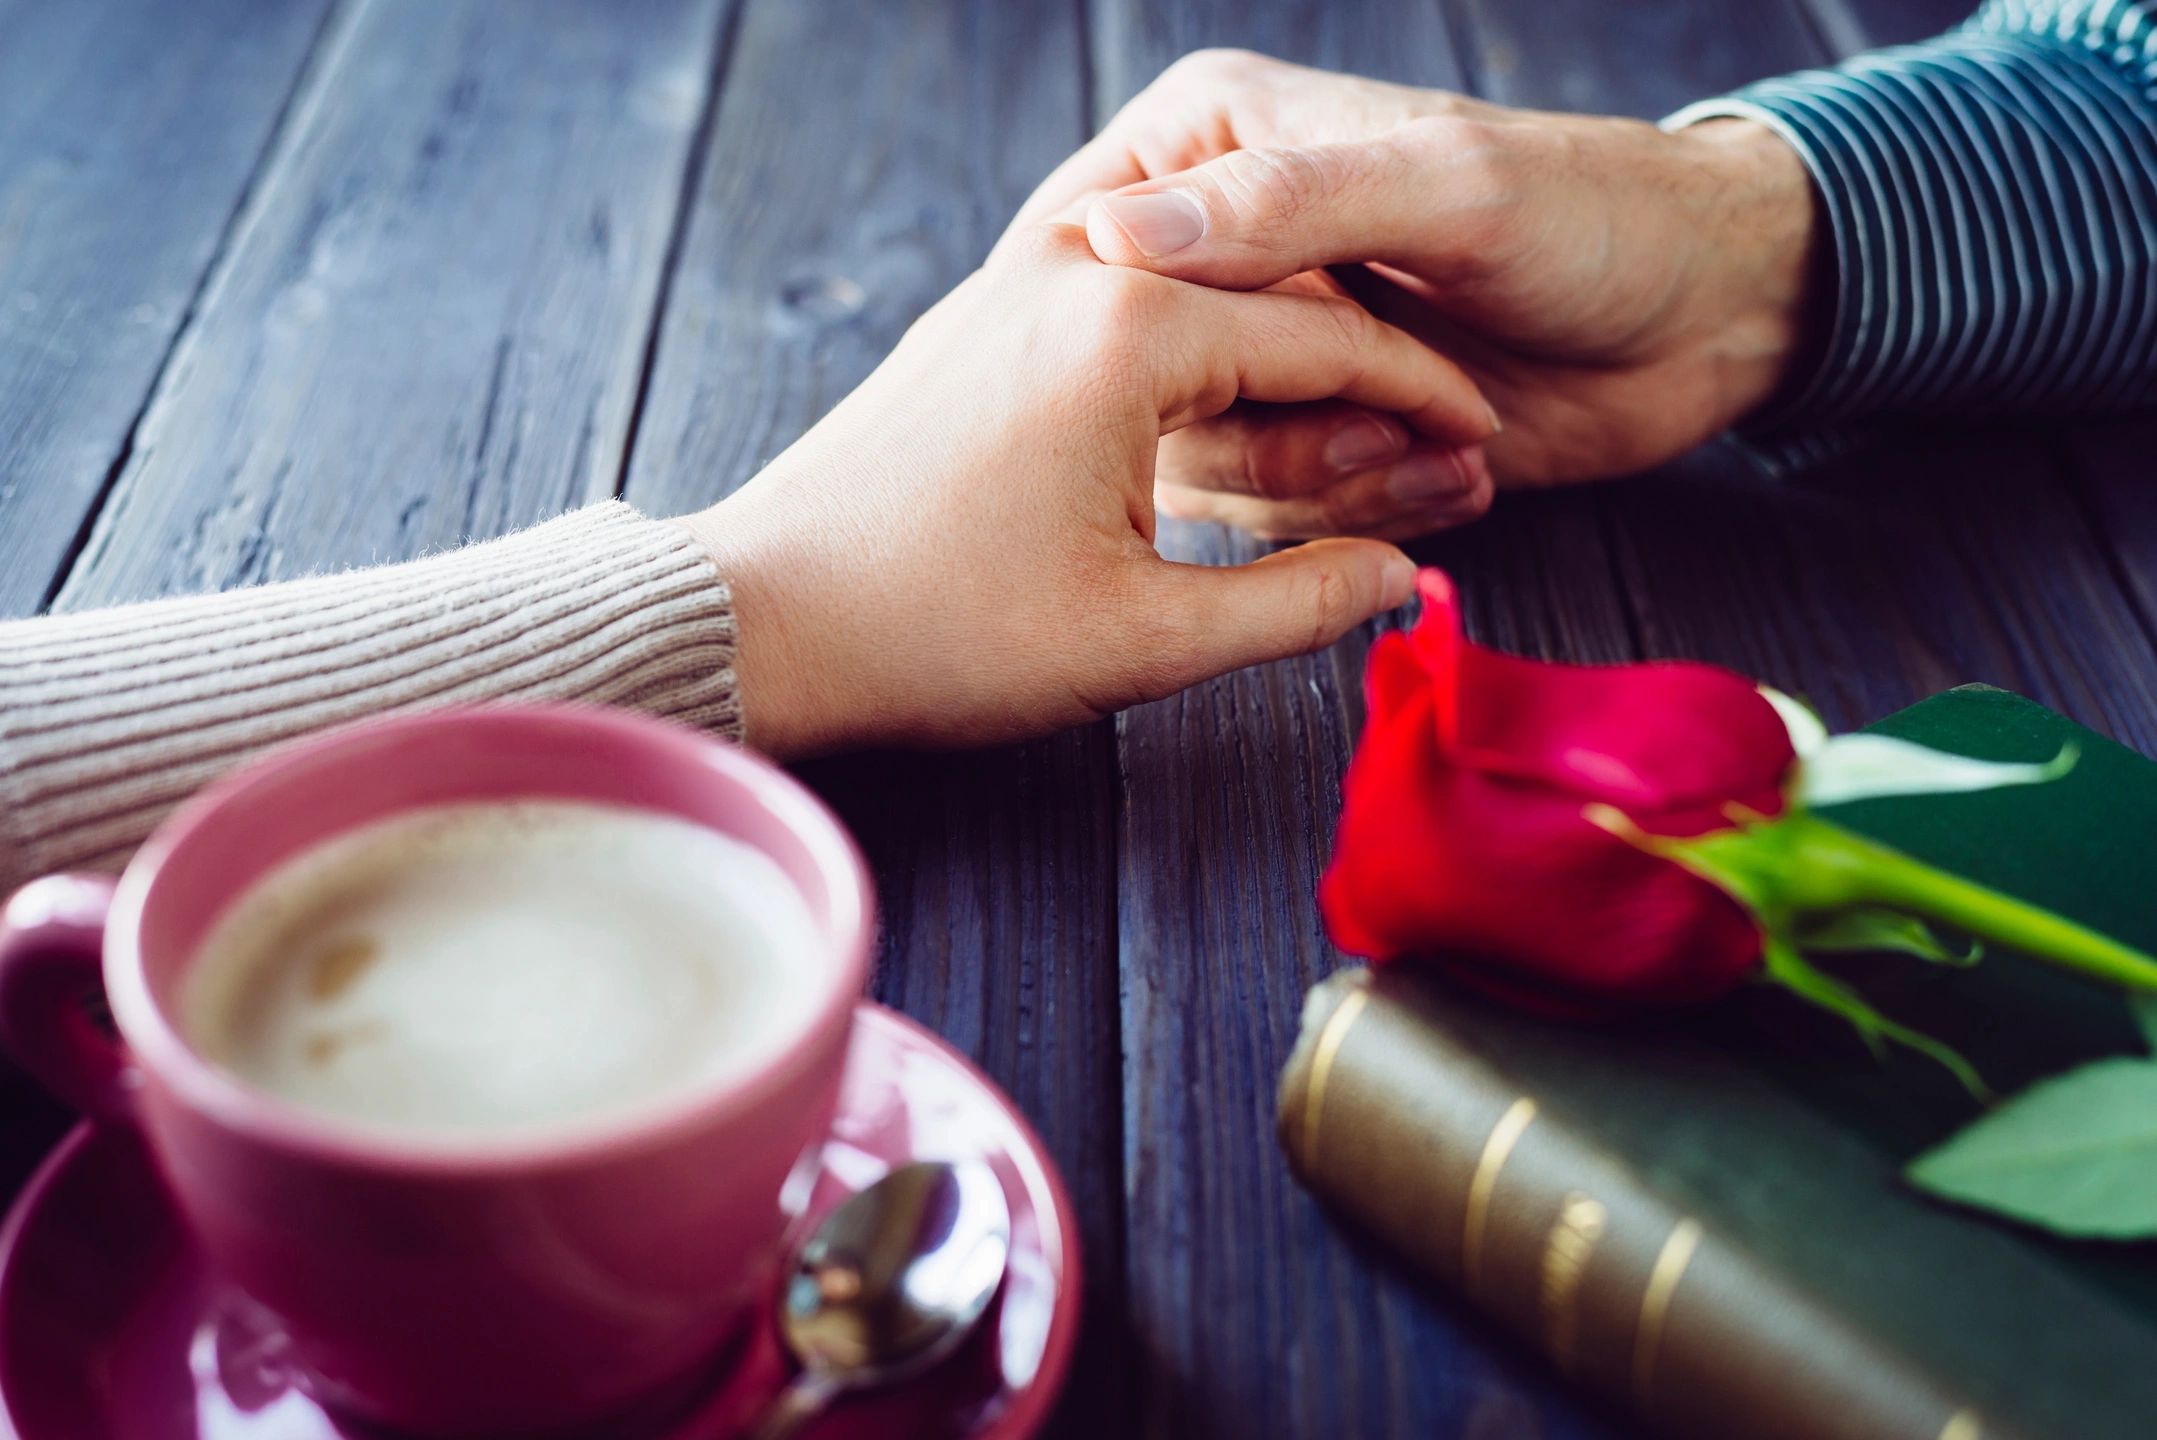 couple holding hands with coffee, book and a rose on table showing intimacy